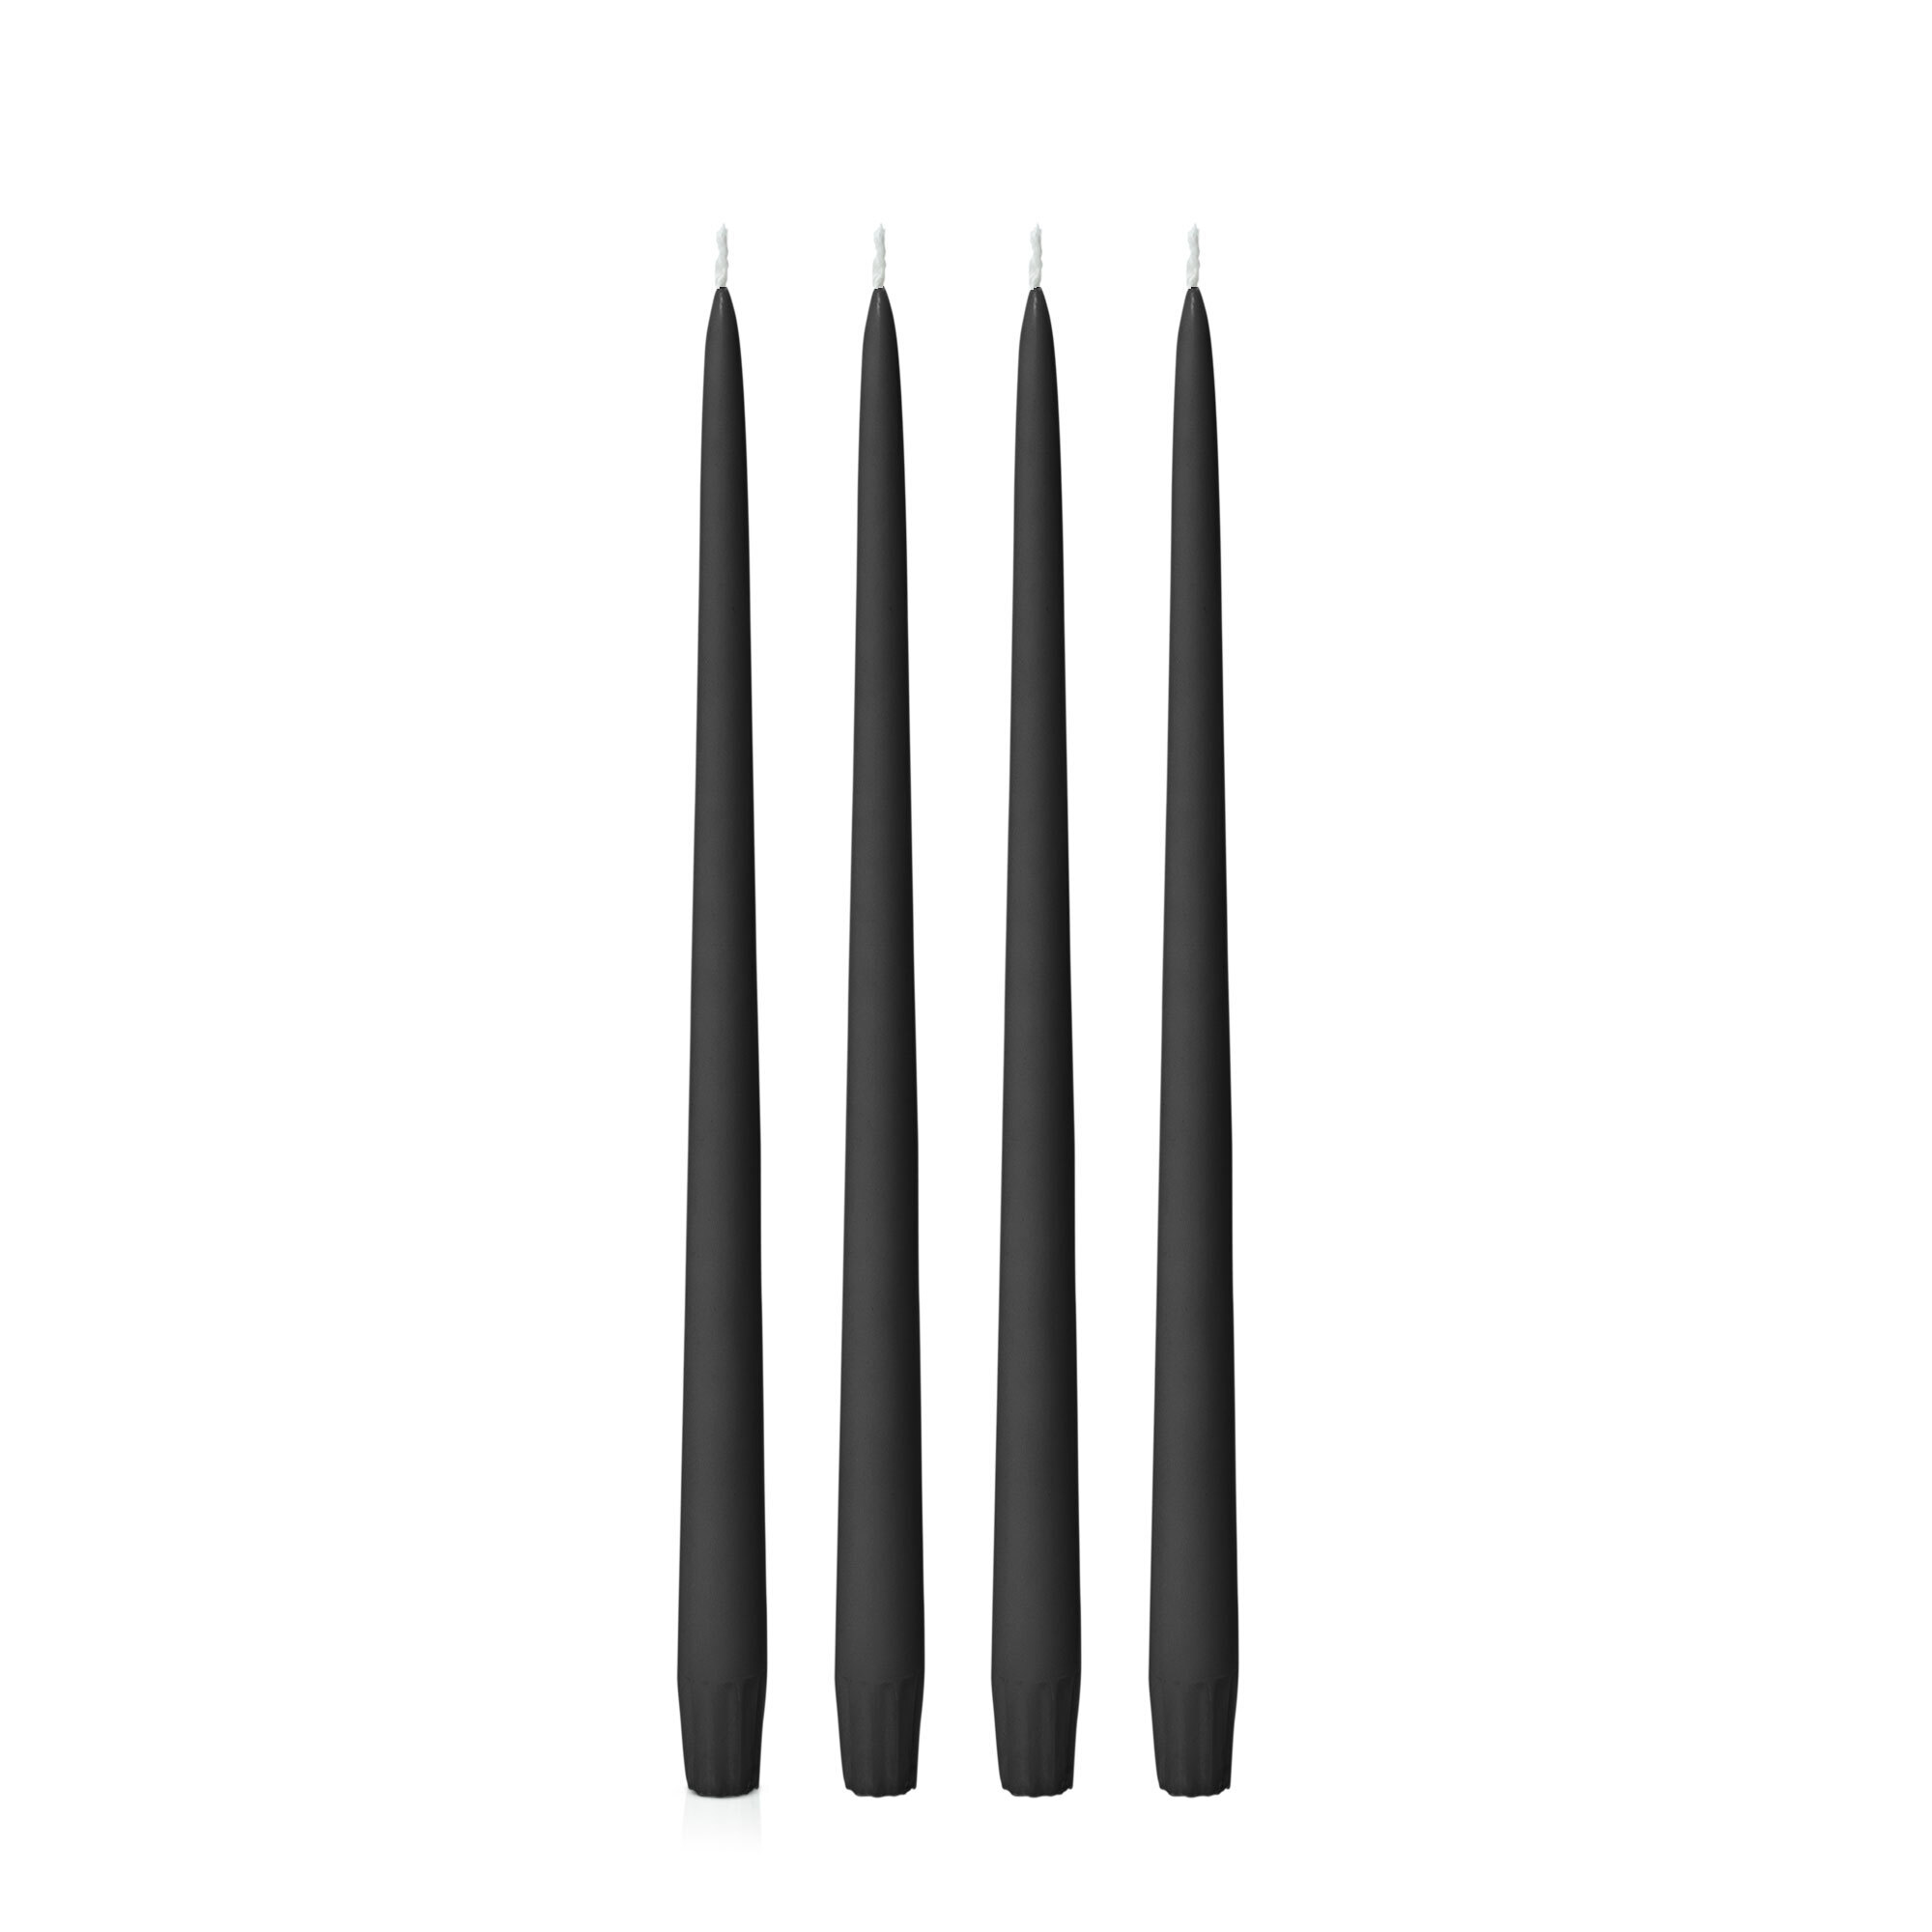 Candles|Taper Candles|Moreton Eco Taper 35cm- Black, Pack of 4